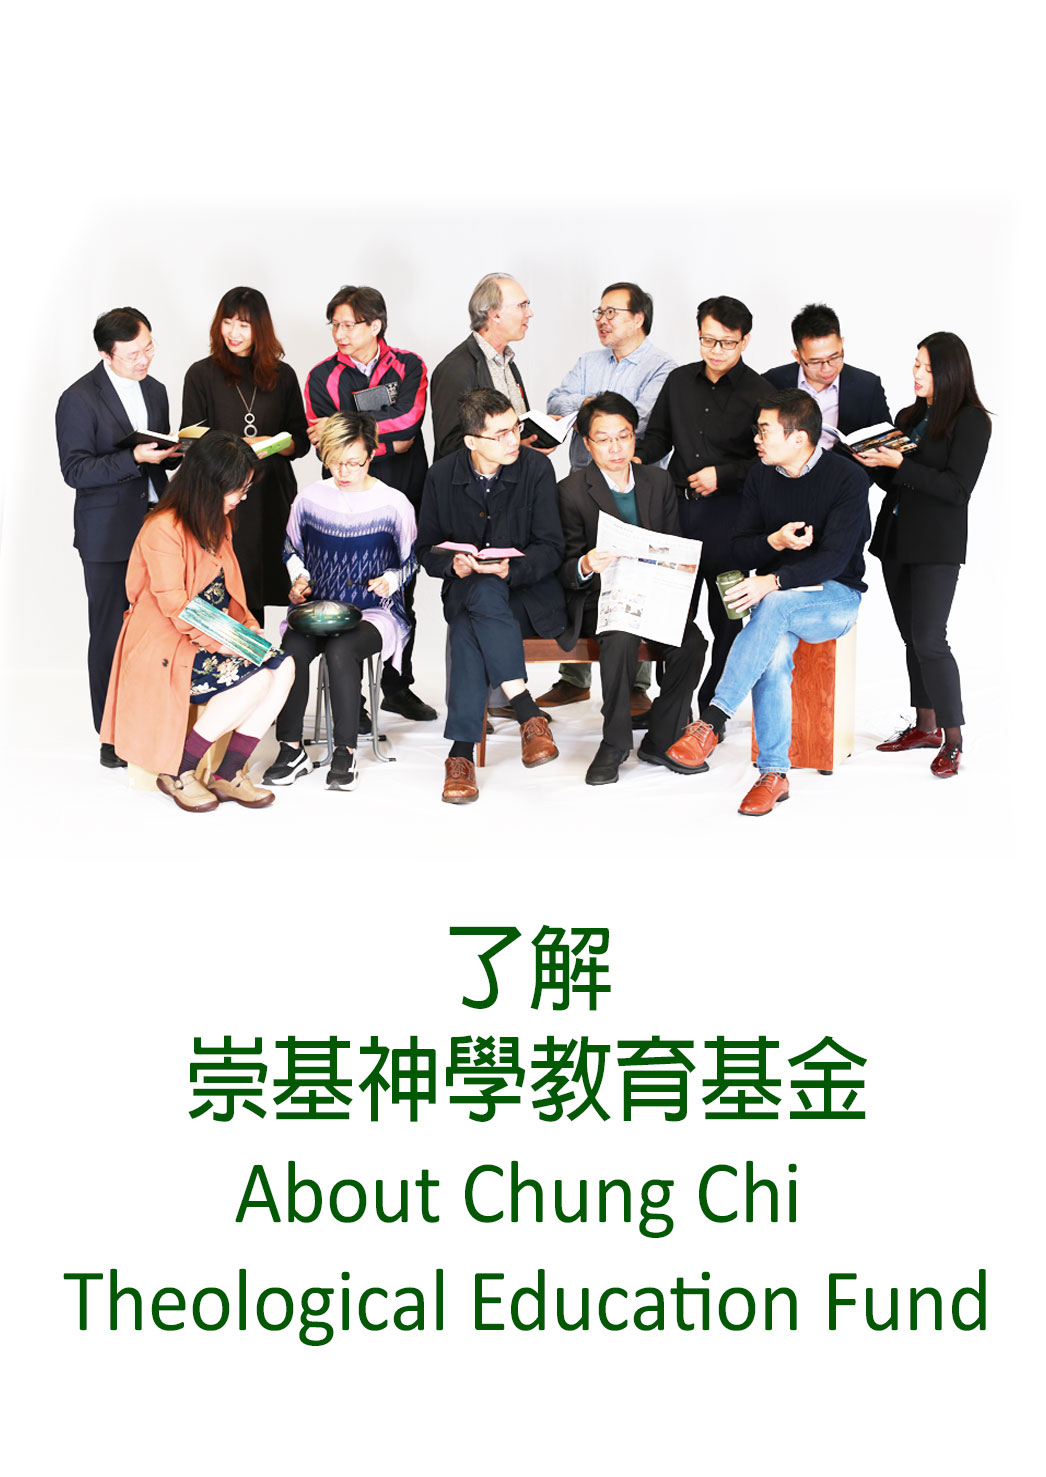 About Chung Chi Theological Education Fund